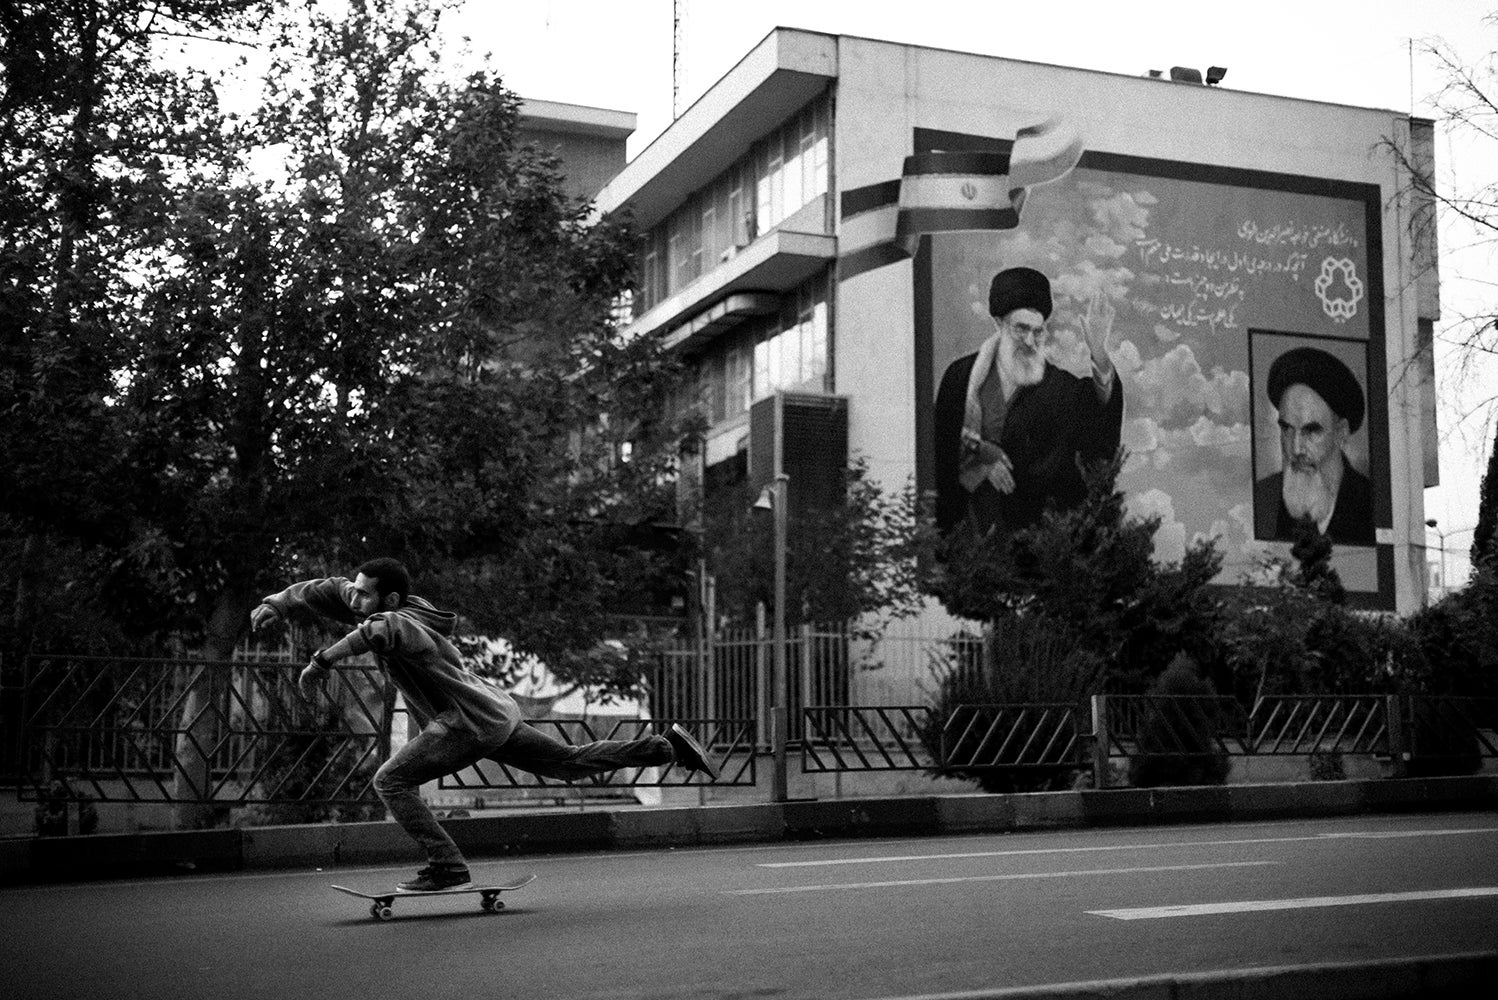 In Tehran, Erfan, 24, rides hurtles past the portraits of Khamenei (left), the Supreme Leader of the Islamic Republic of Iran since 1989, and his predecessor Khomeini (far right).